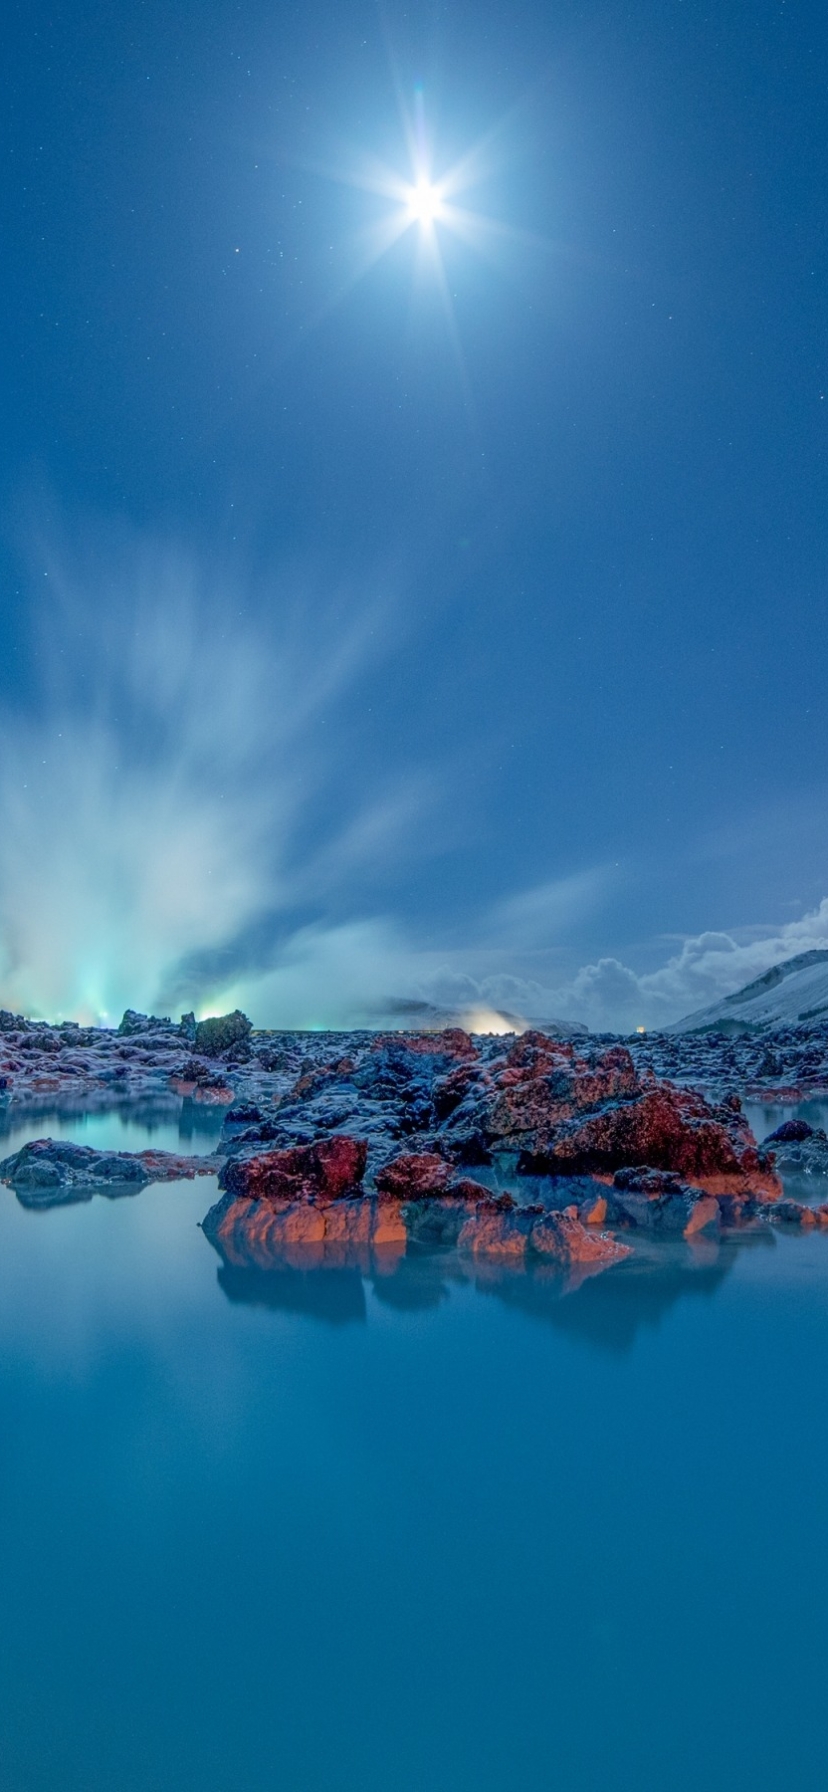 Winter Night over Blue Lagoon in Iceland